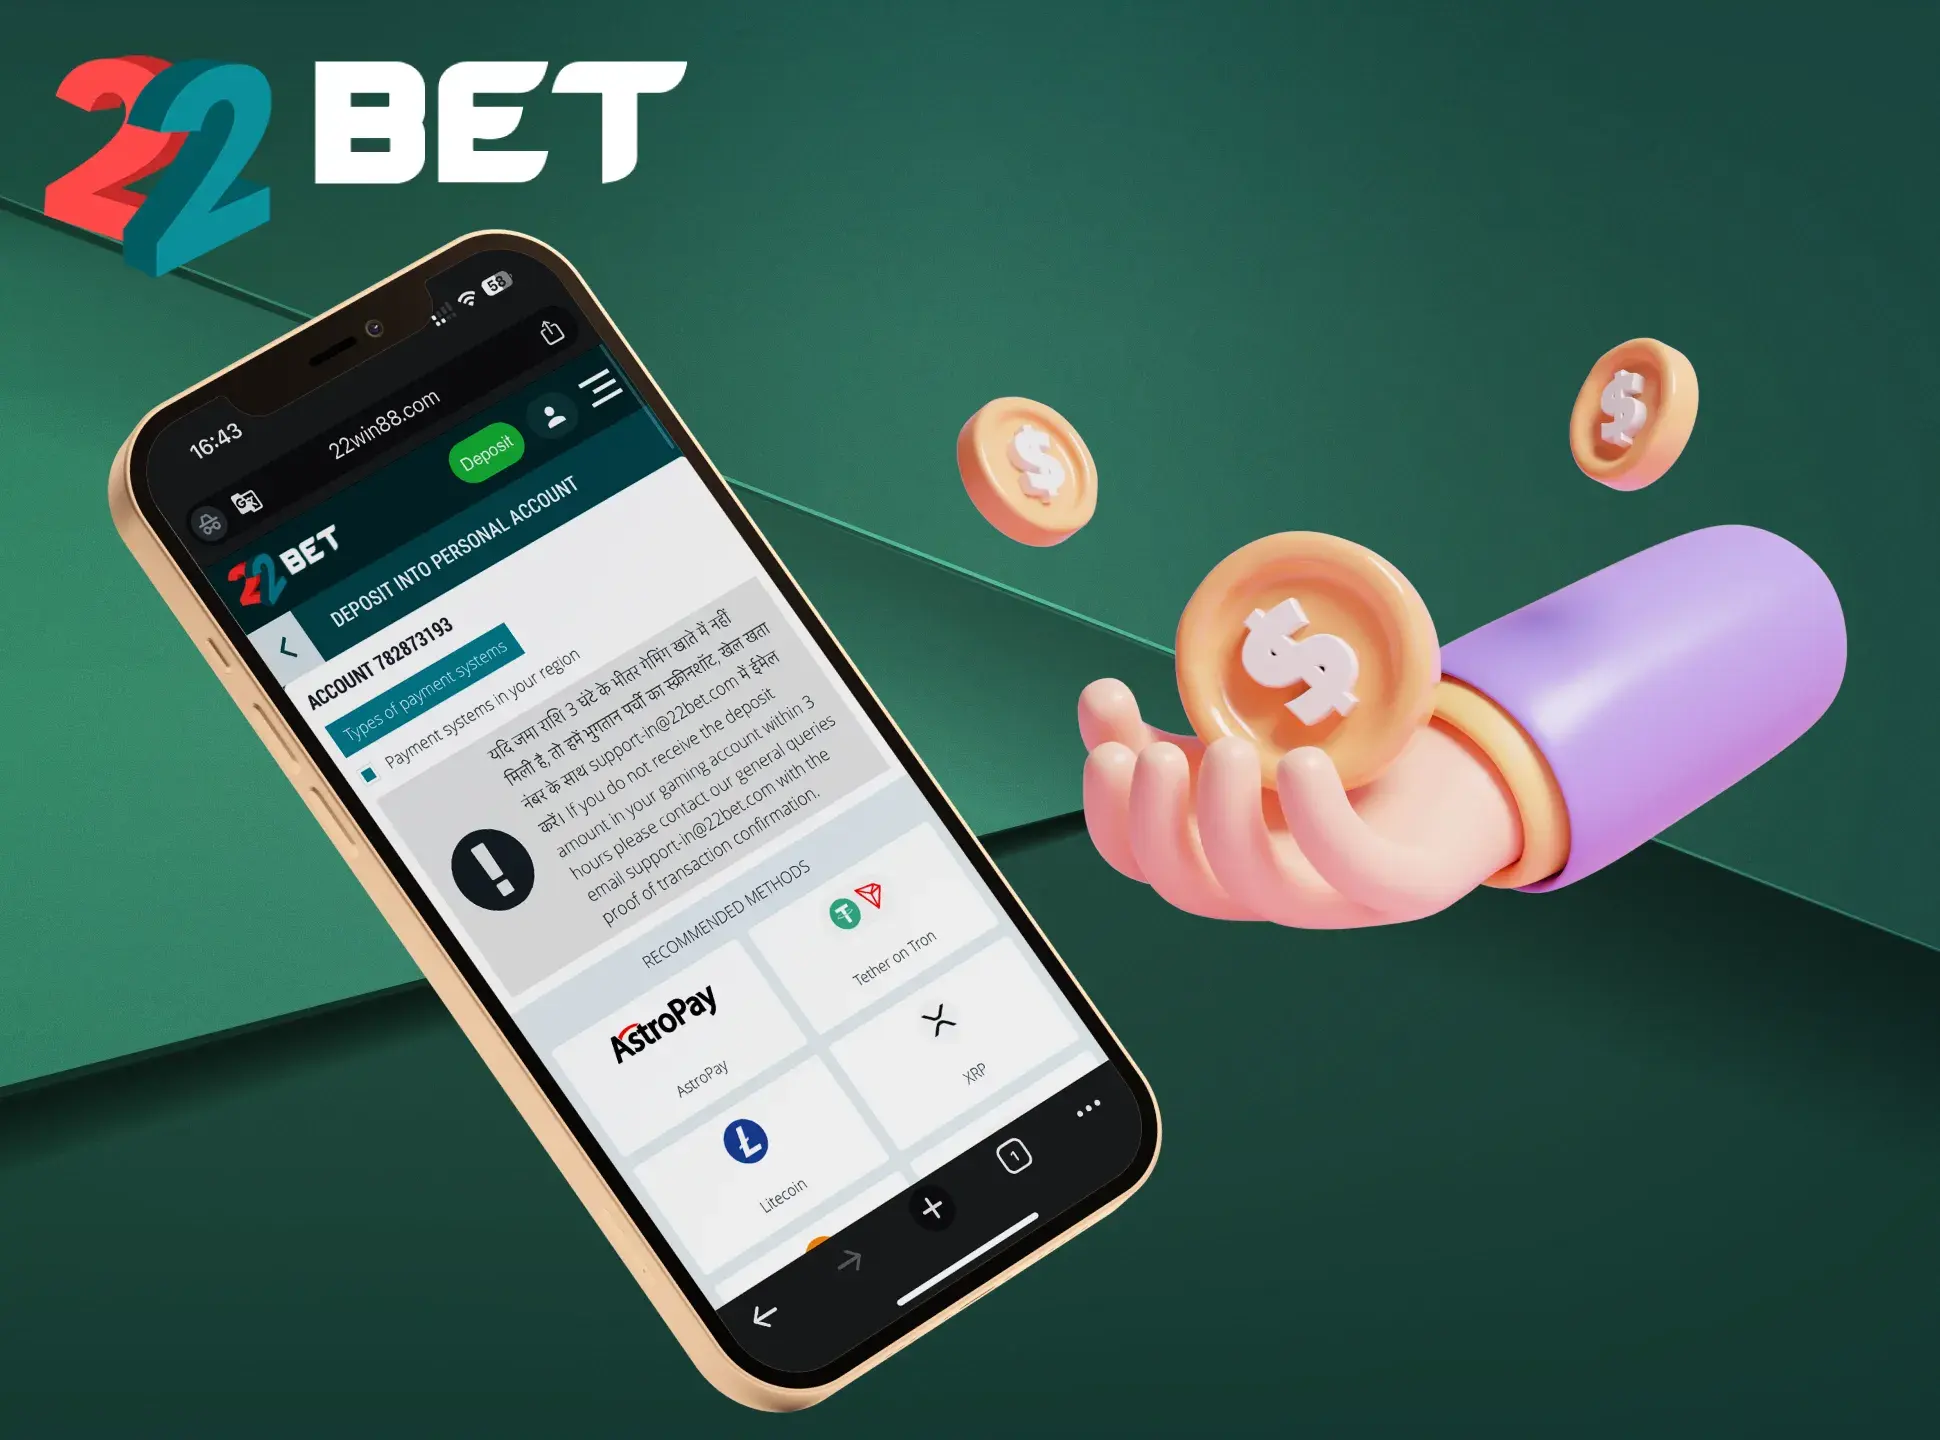 Make your first deposit on the 22Bet app.